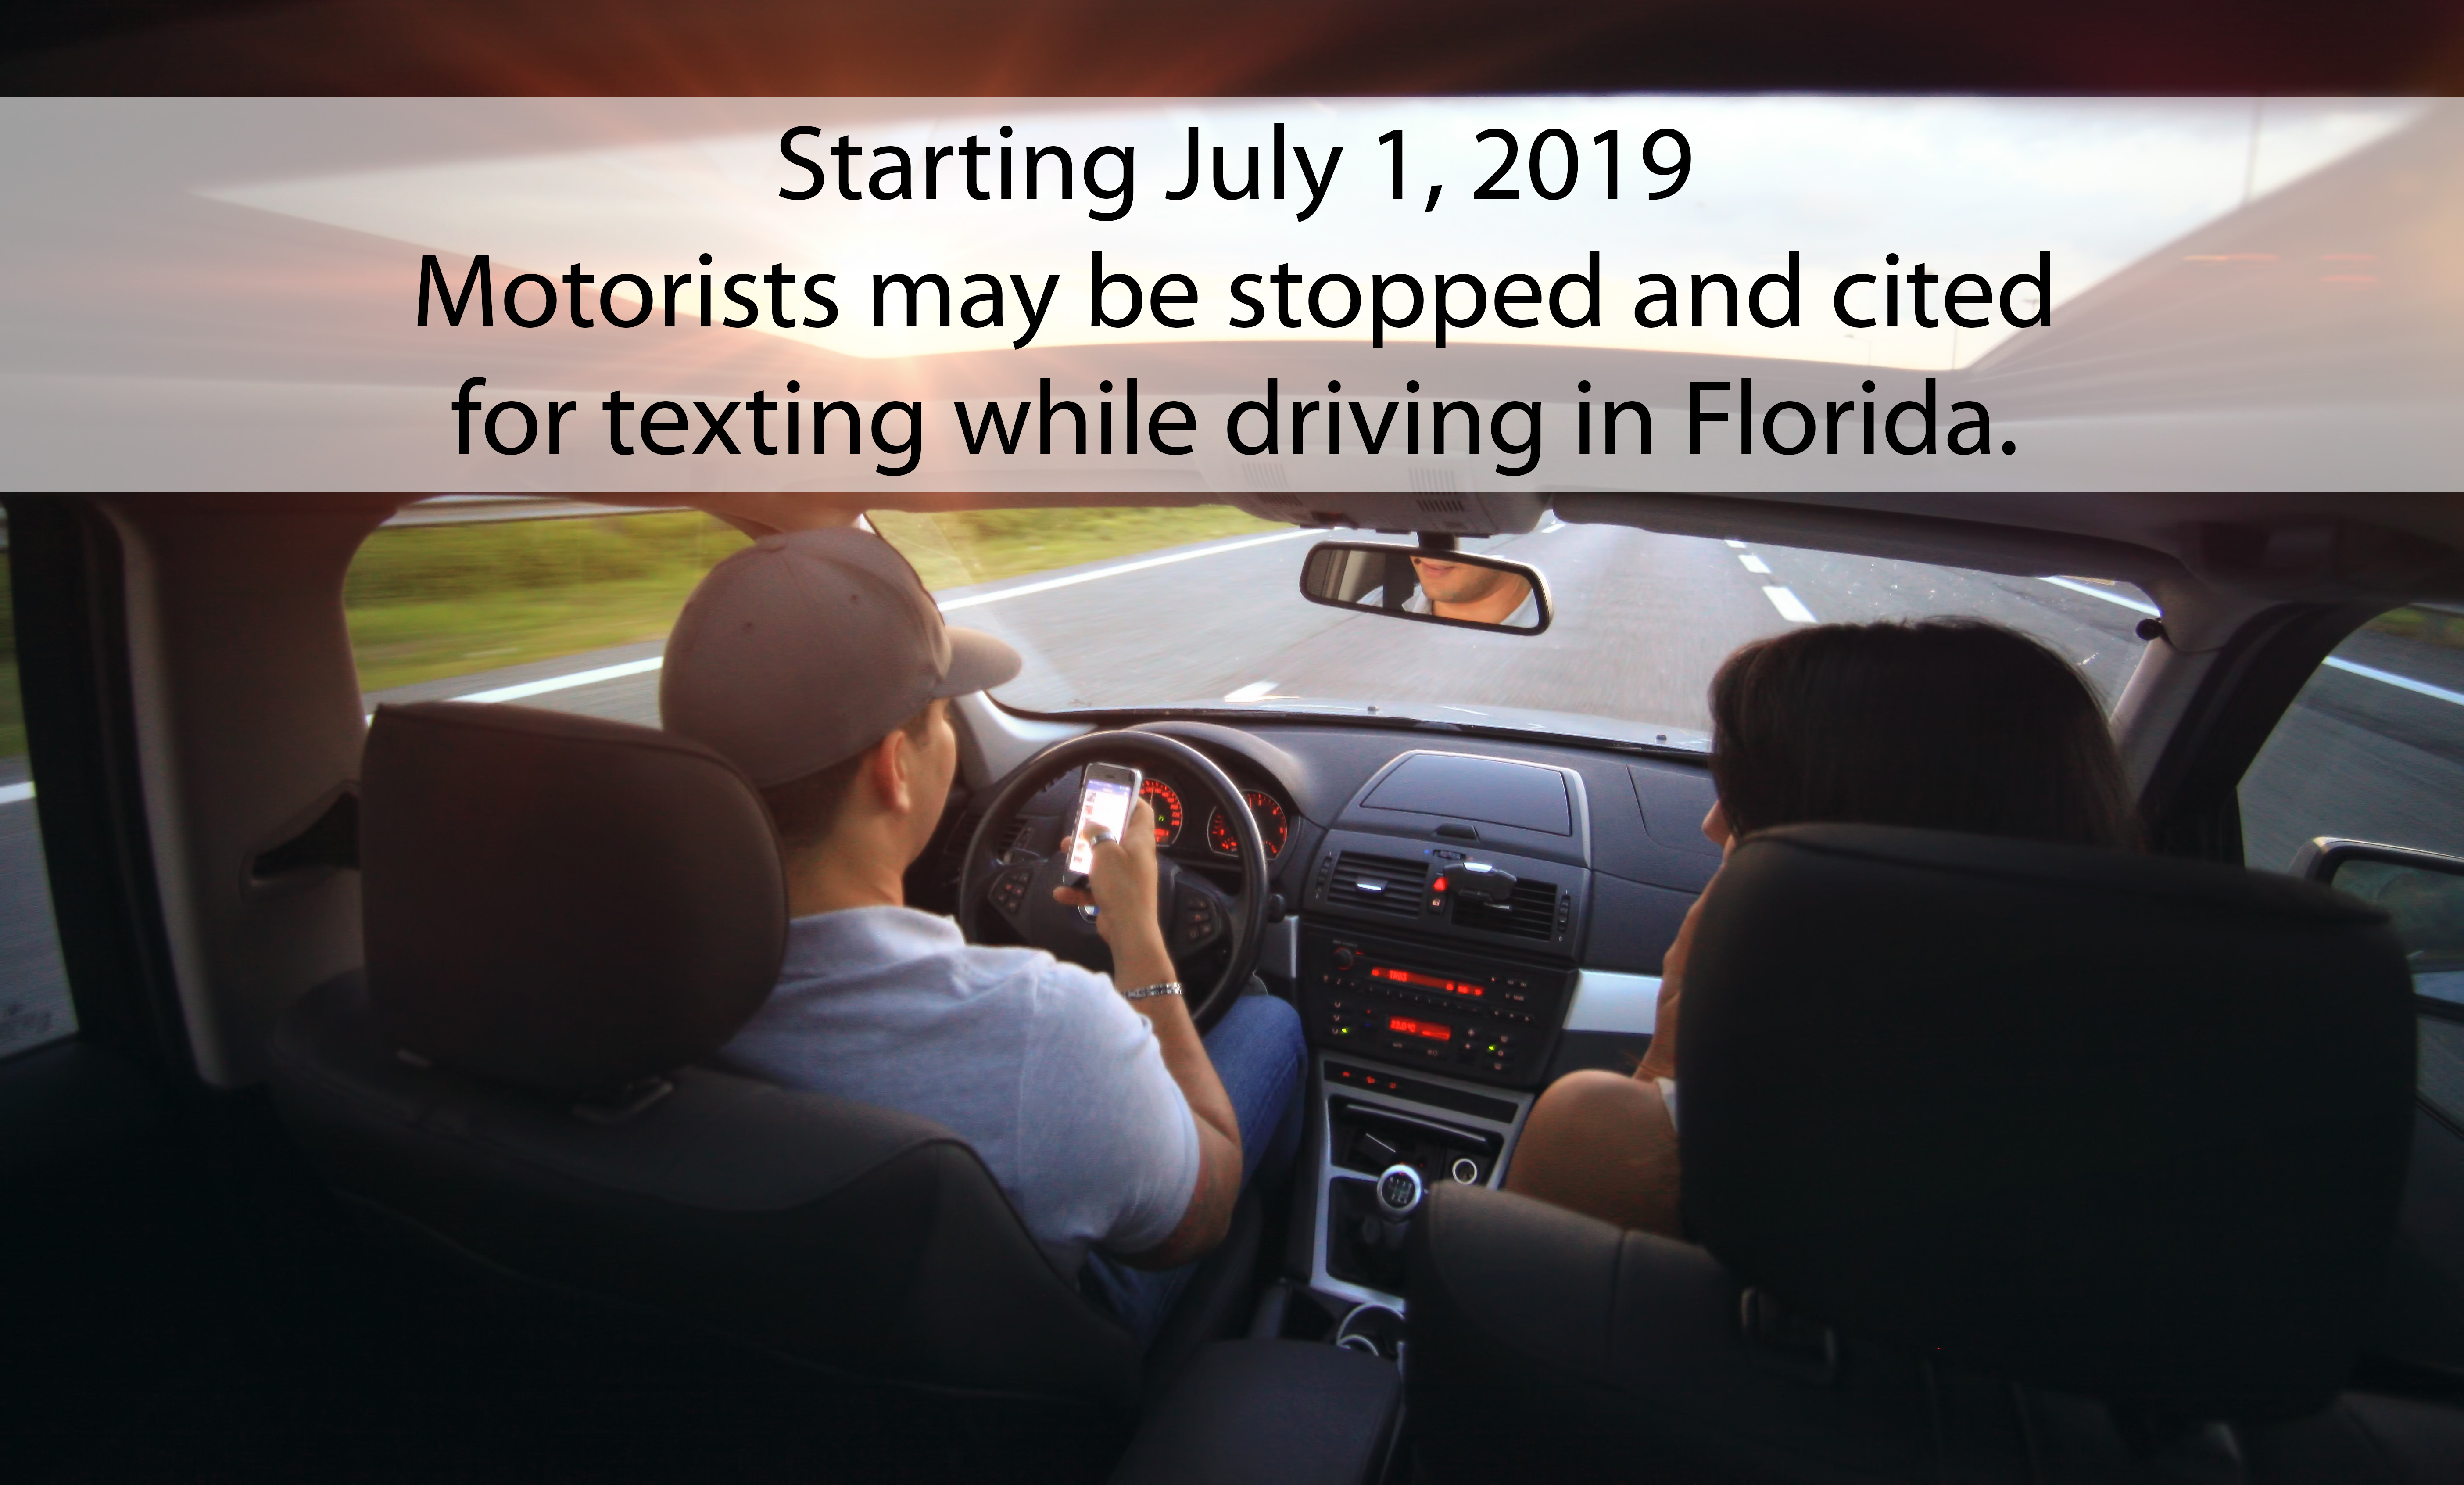 texting and driving, citrus gazette, texting